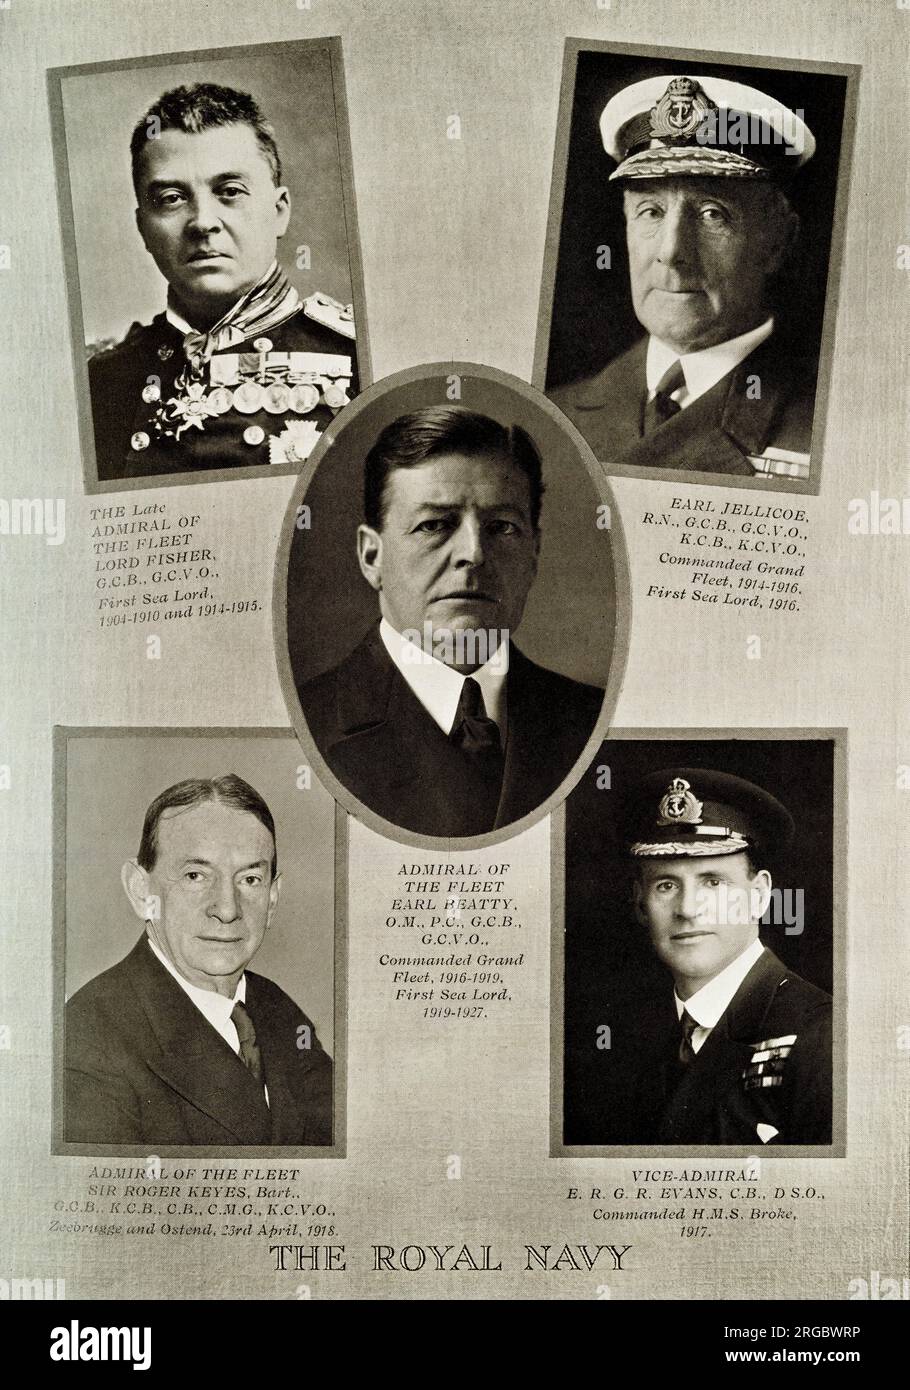 Royal Navy leaders during the first 25 years of the reign of King George V: Lord Fisher, Earl Jellicoe, Earl Beatty, Sir Roger Keyes, Vice-Admiral Evans. Stock Photo